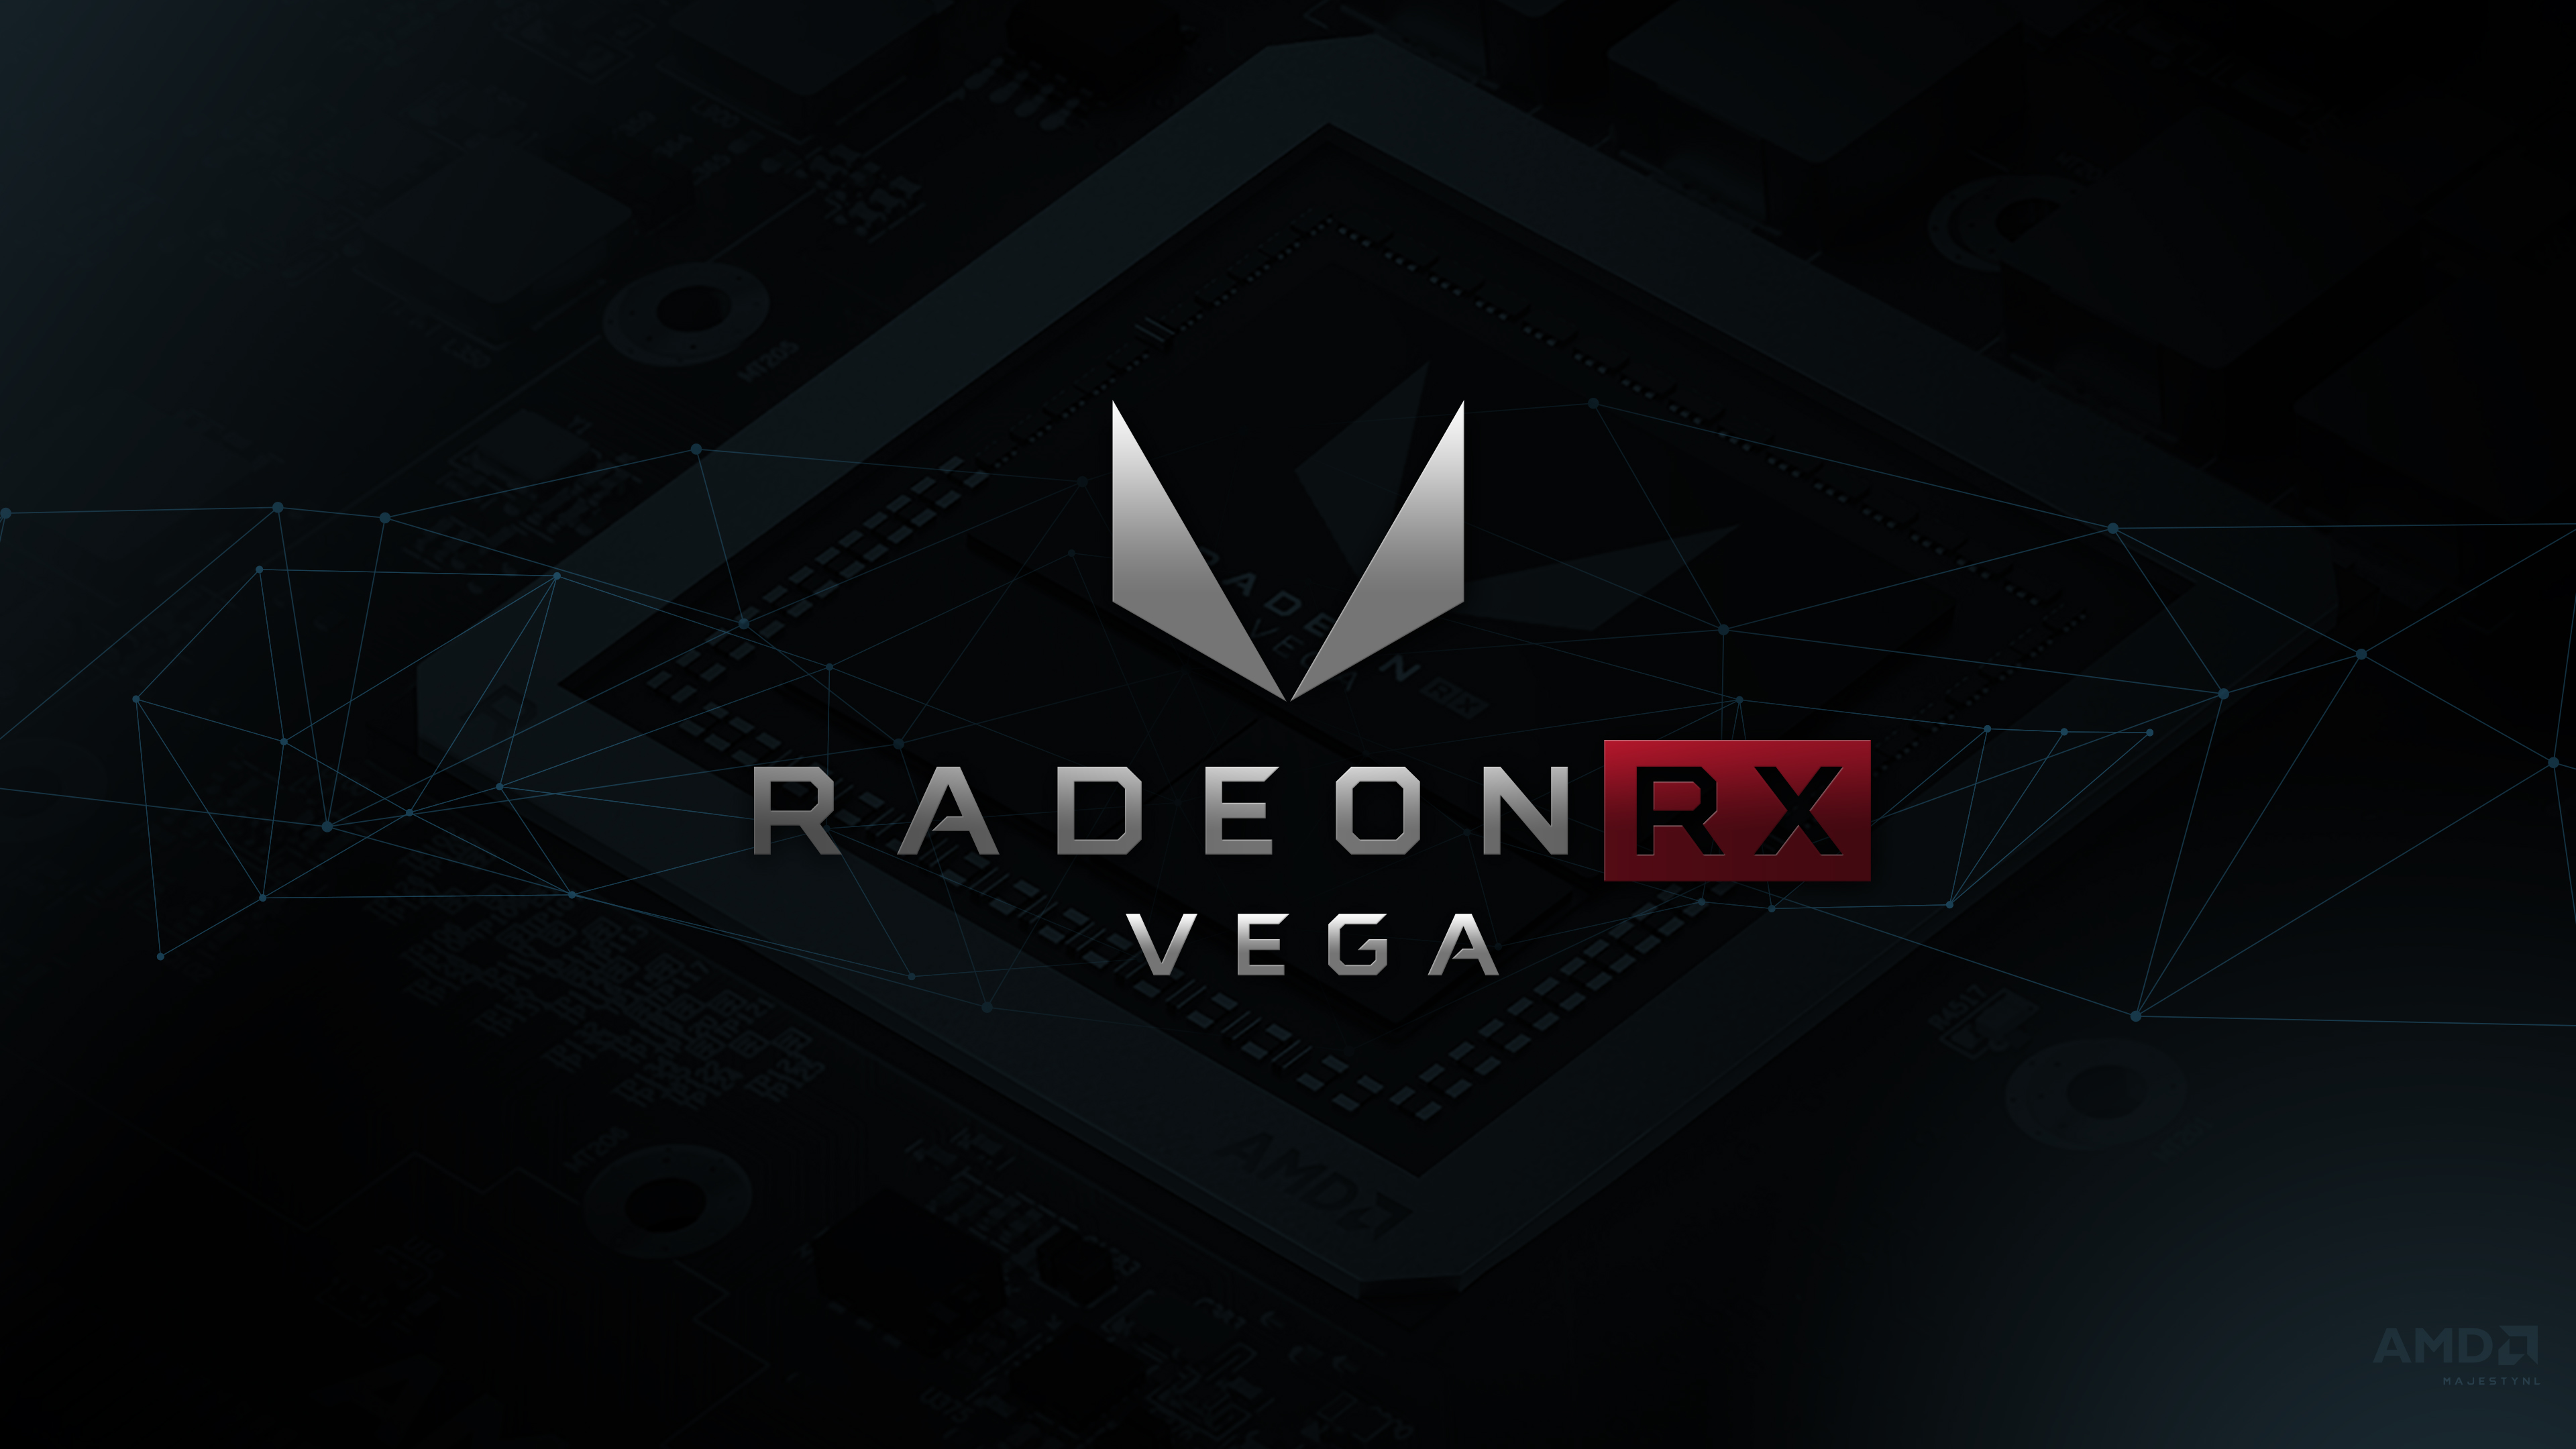 Radeon VII Wallpaper for those who are interested